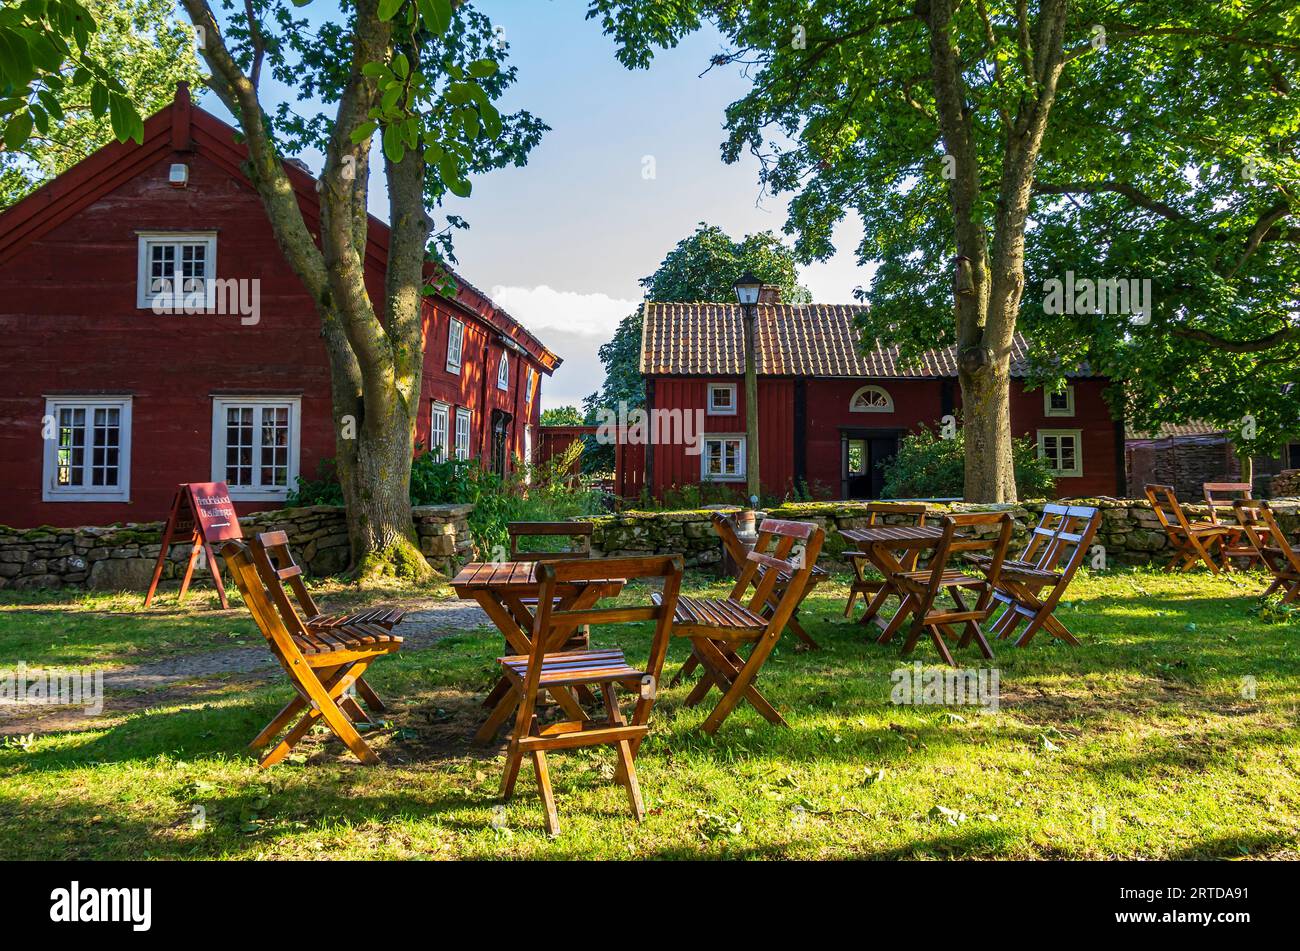 Historical homestead and coffee shop in the open-air museum of Himmelsberga (Olands Museum Himmelsberga), Oland, Kalmar county, Sweden. Stock Photo